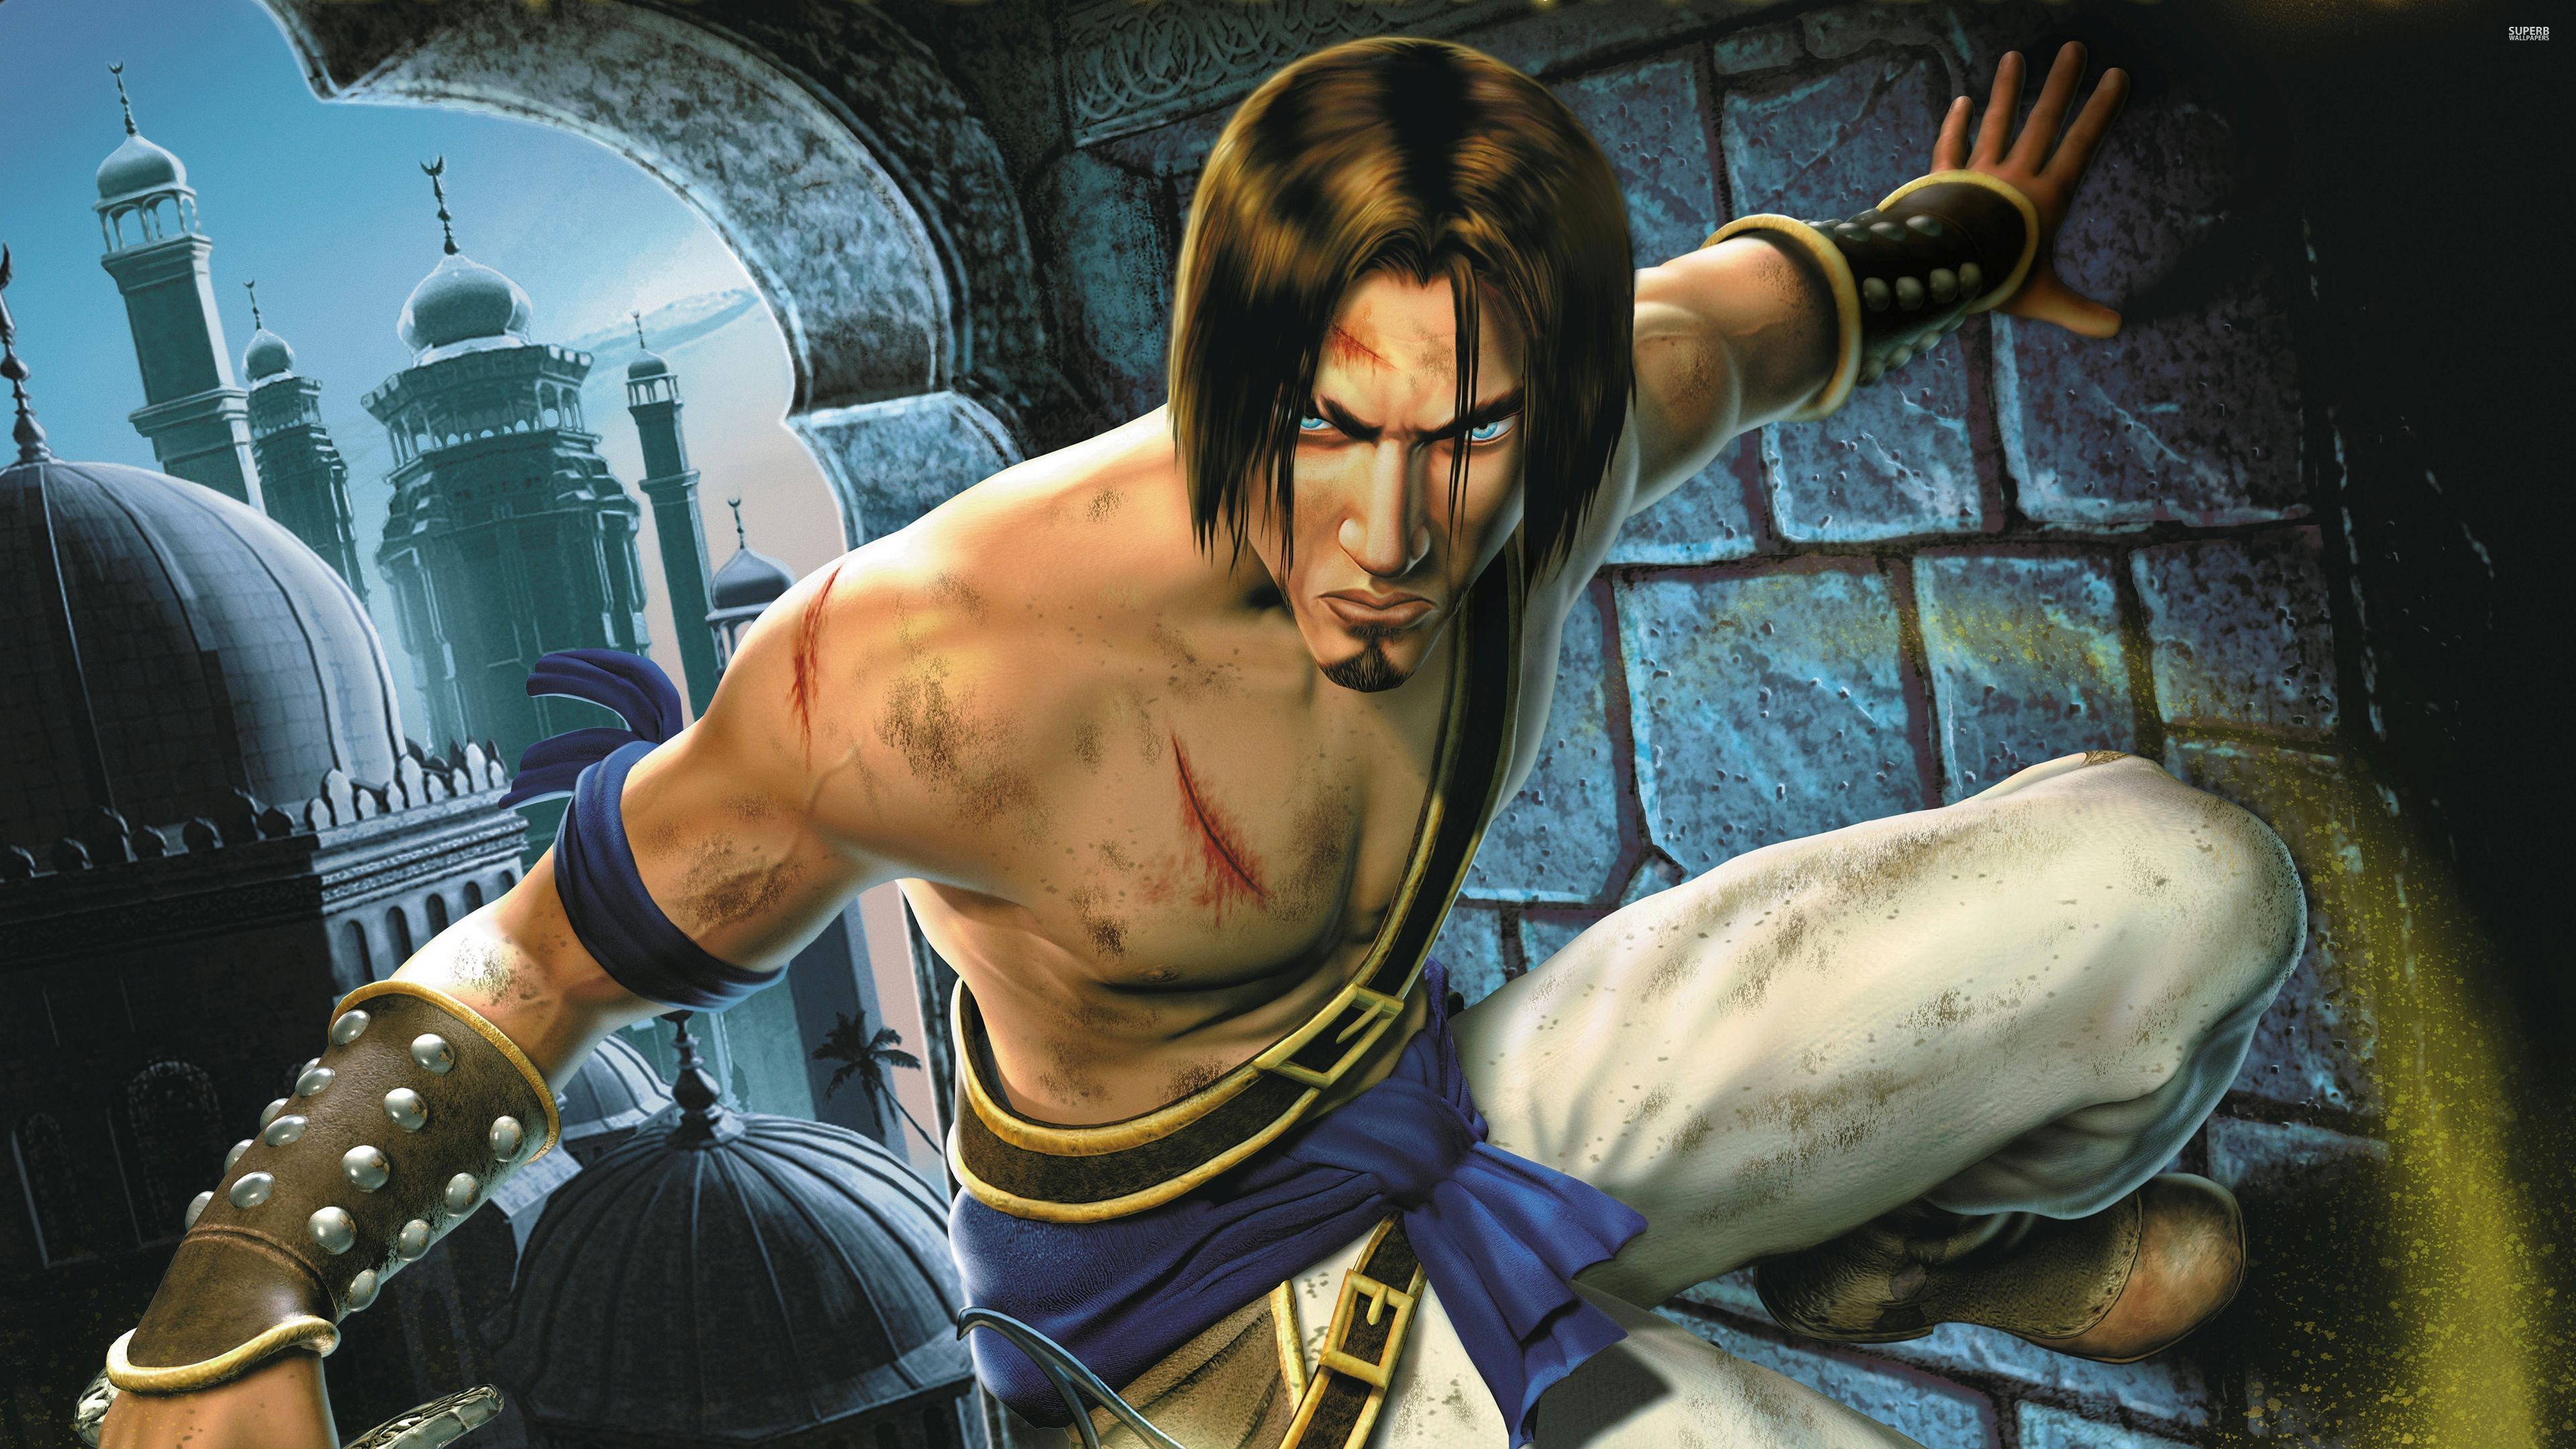 Prince of persia the sands of time pictures 6